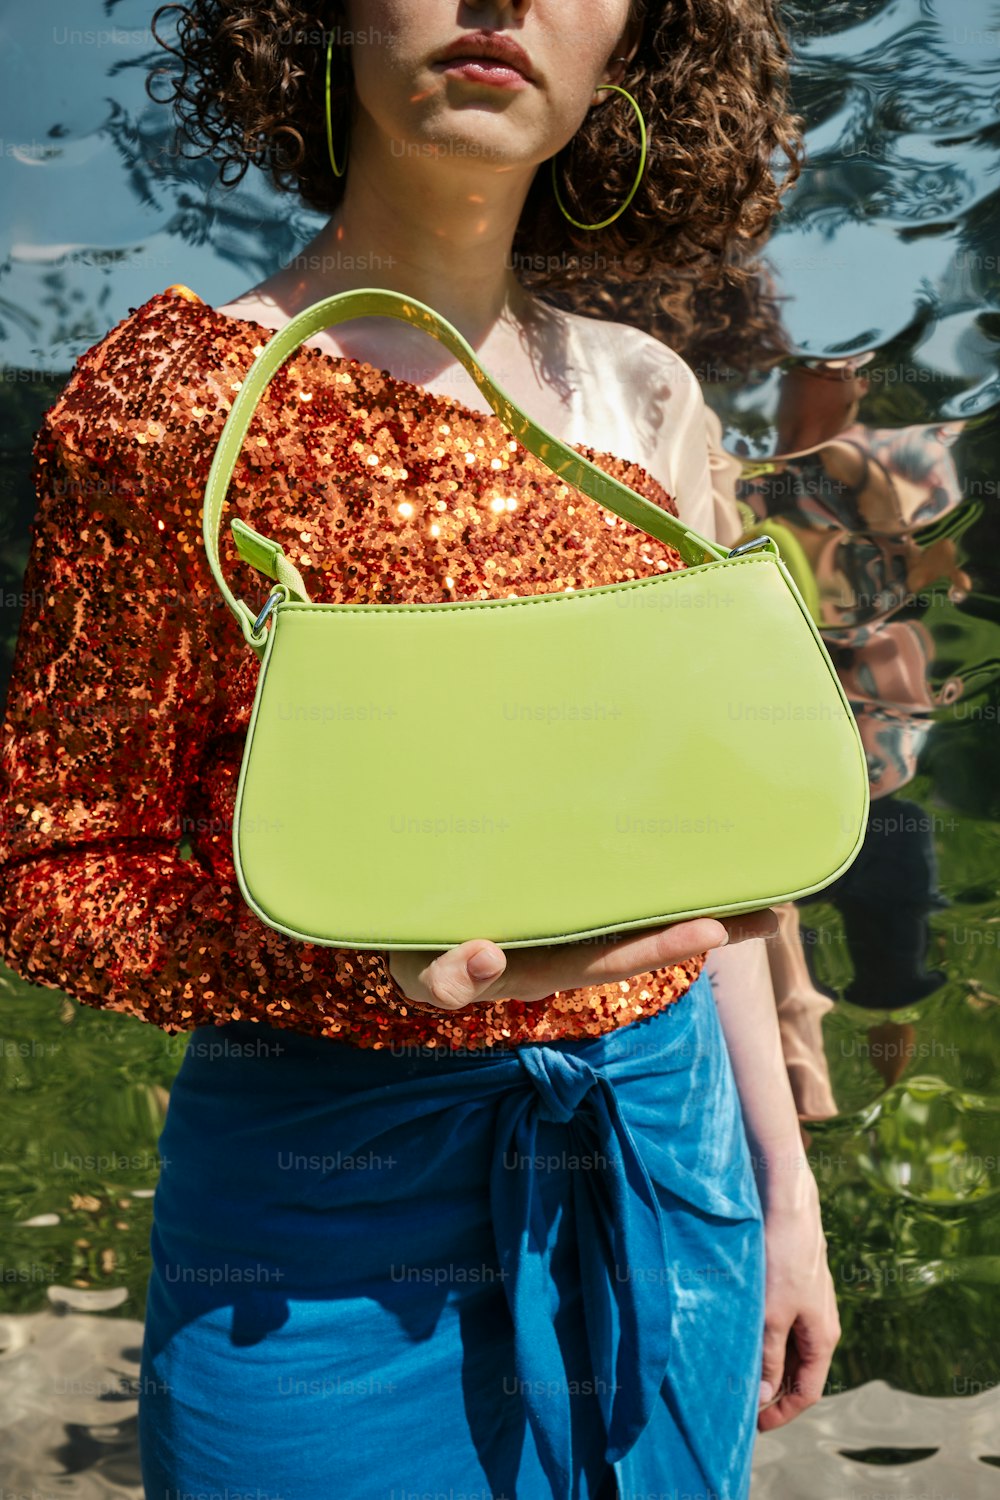 a woman holding a green purse in her hand